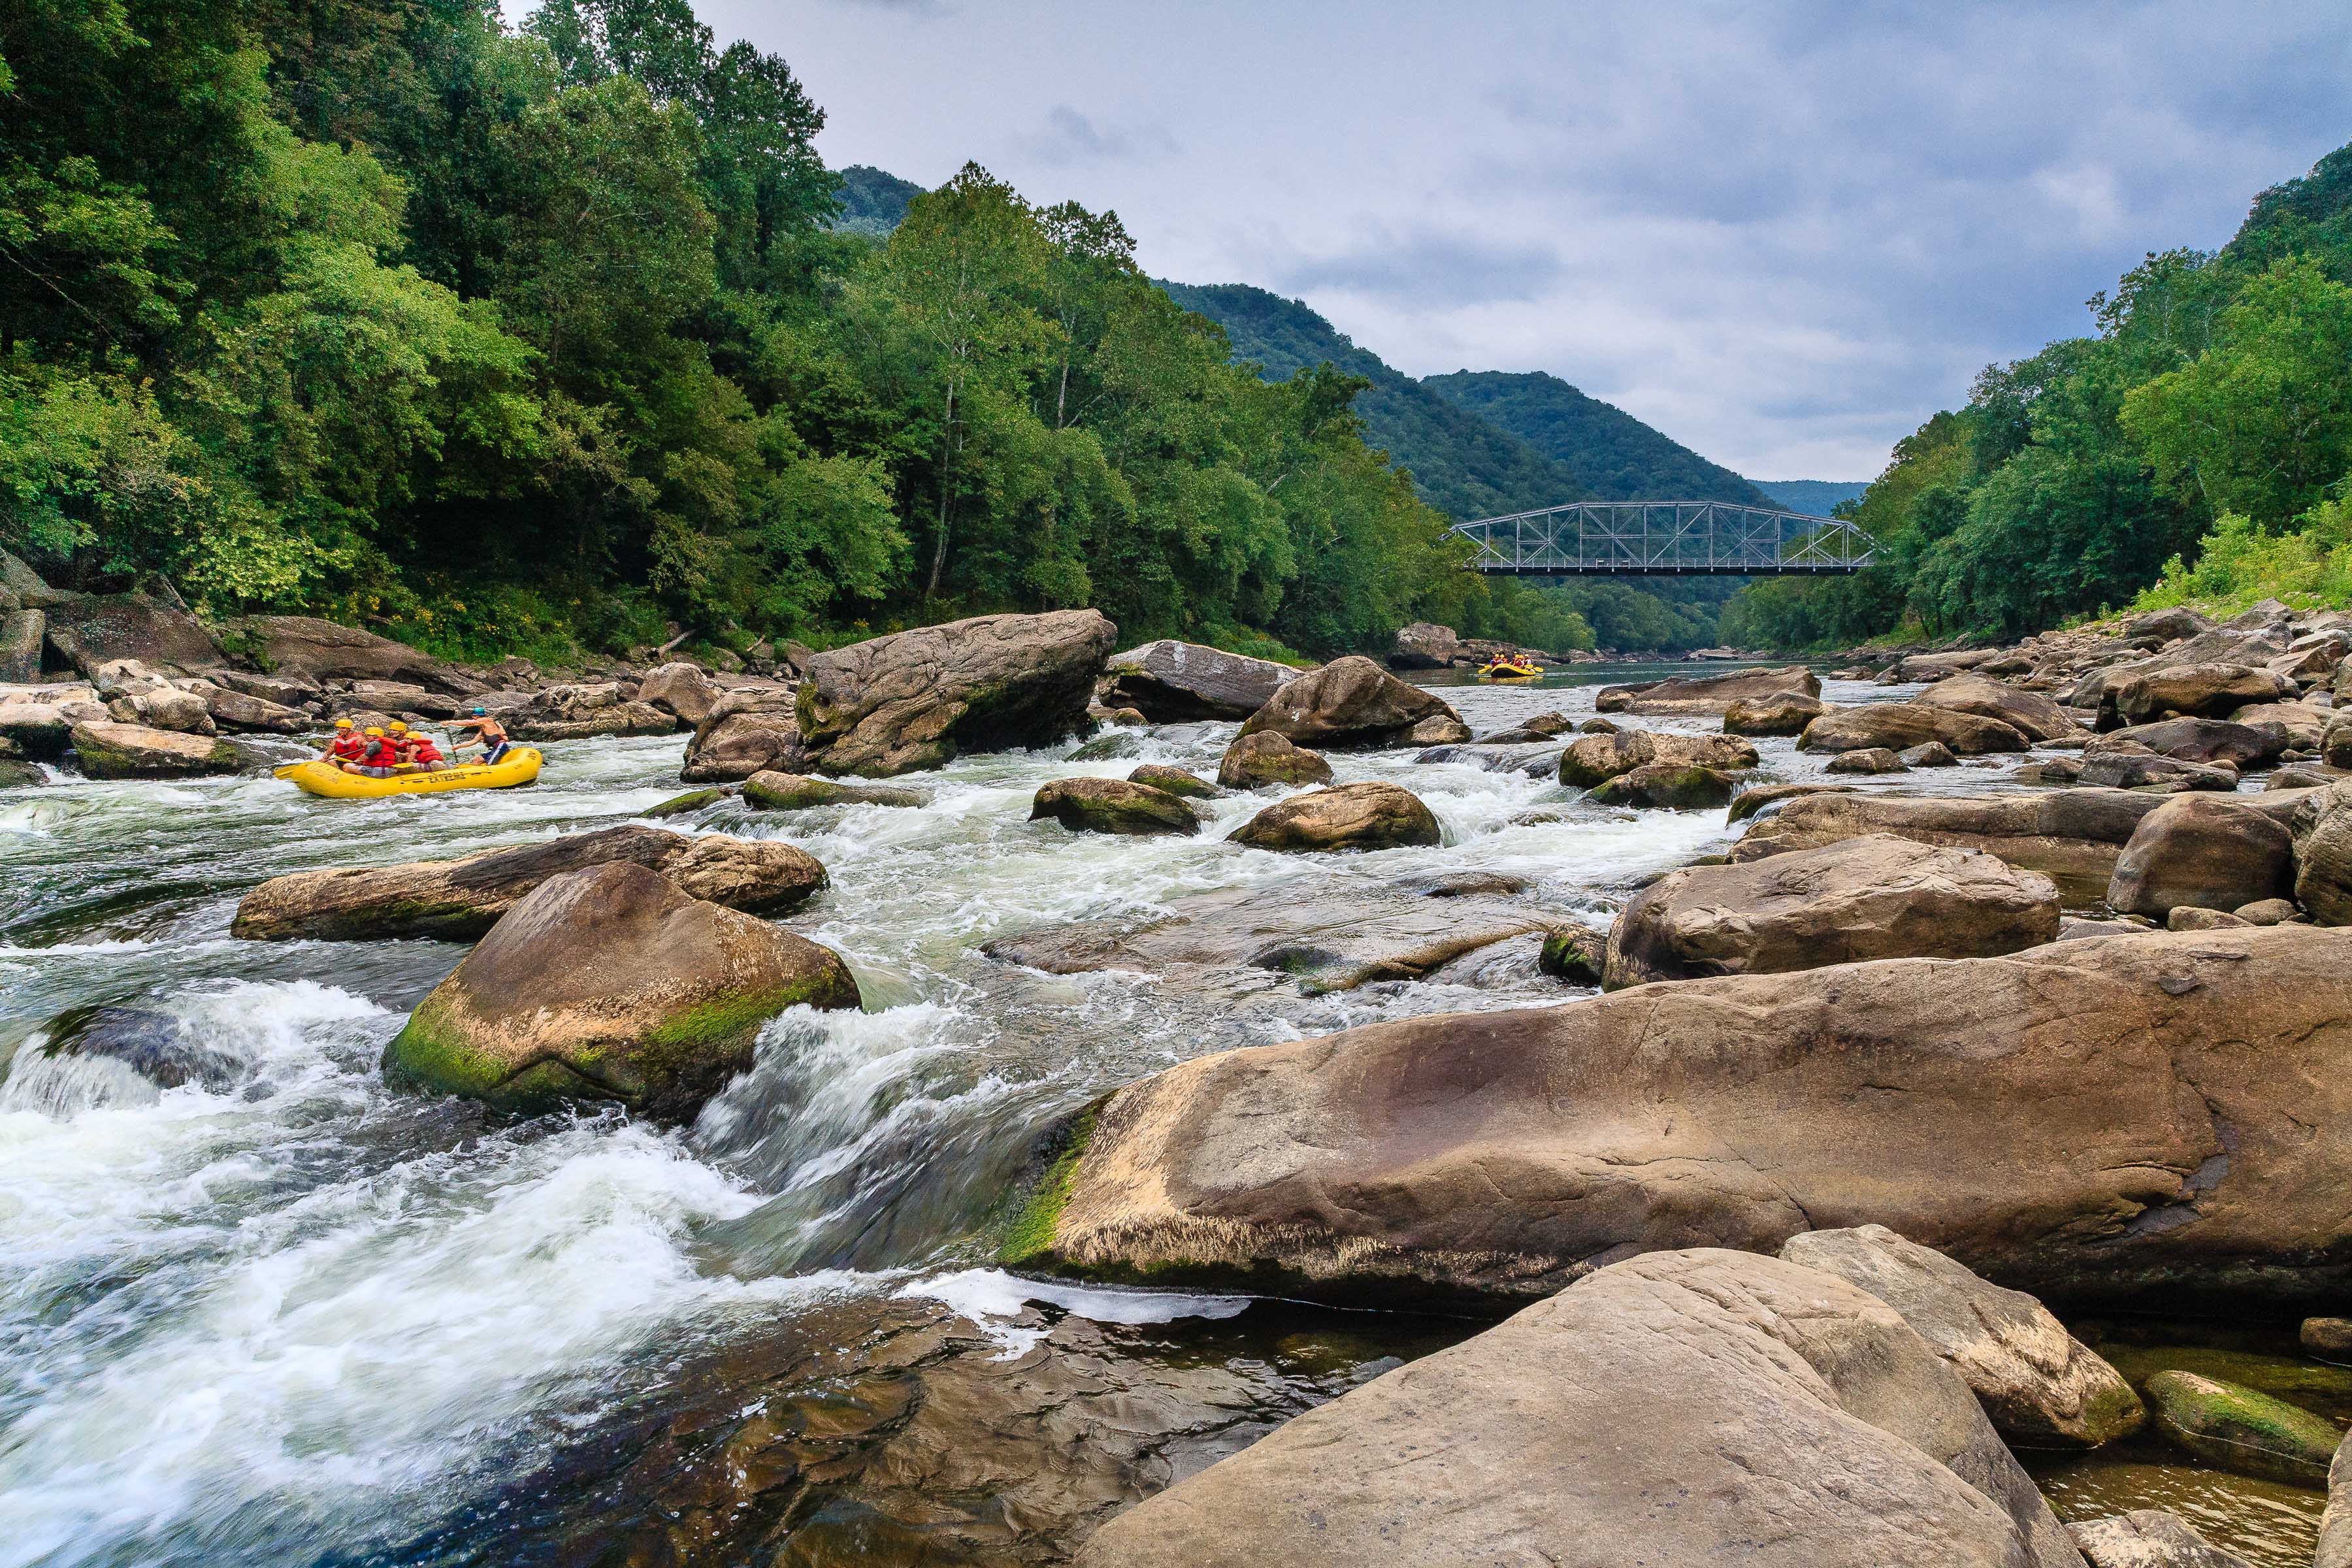 people in a whitewater raft exploring a rocky river with a bridge in the distance